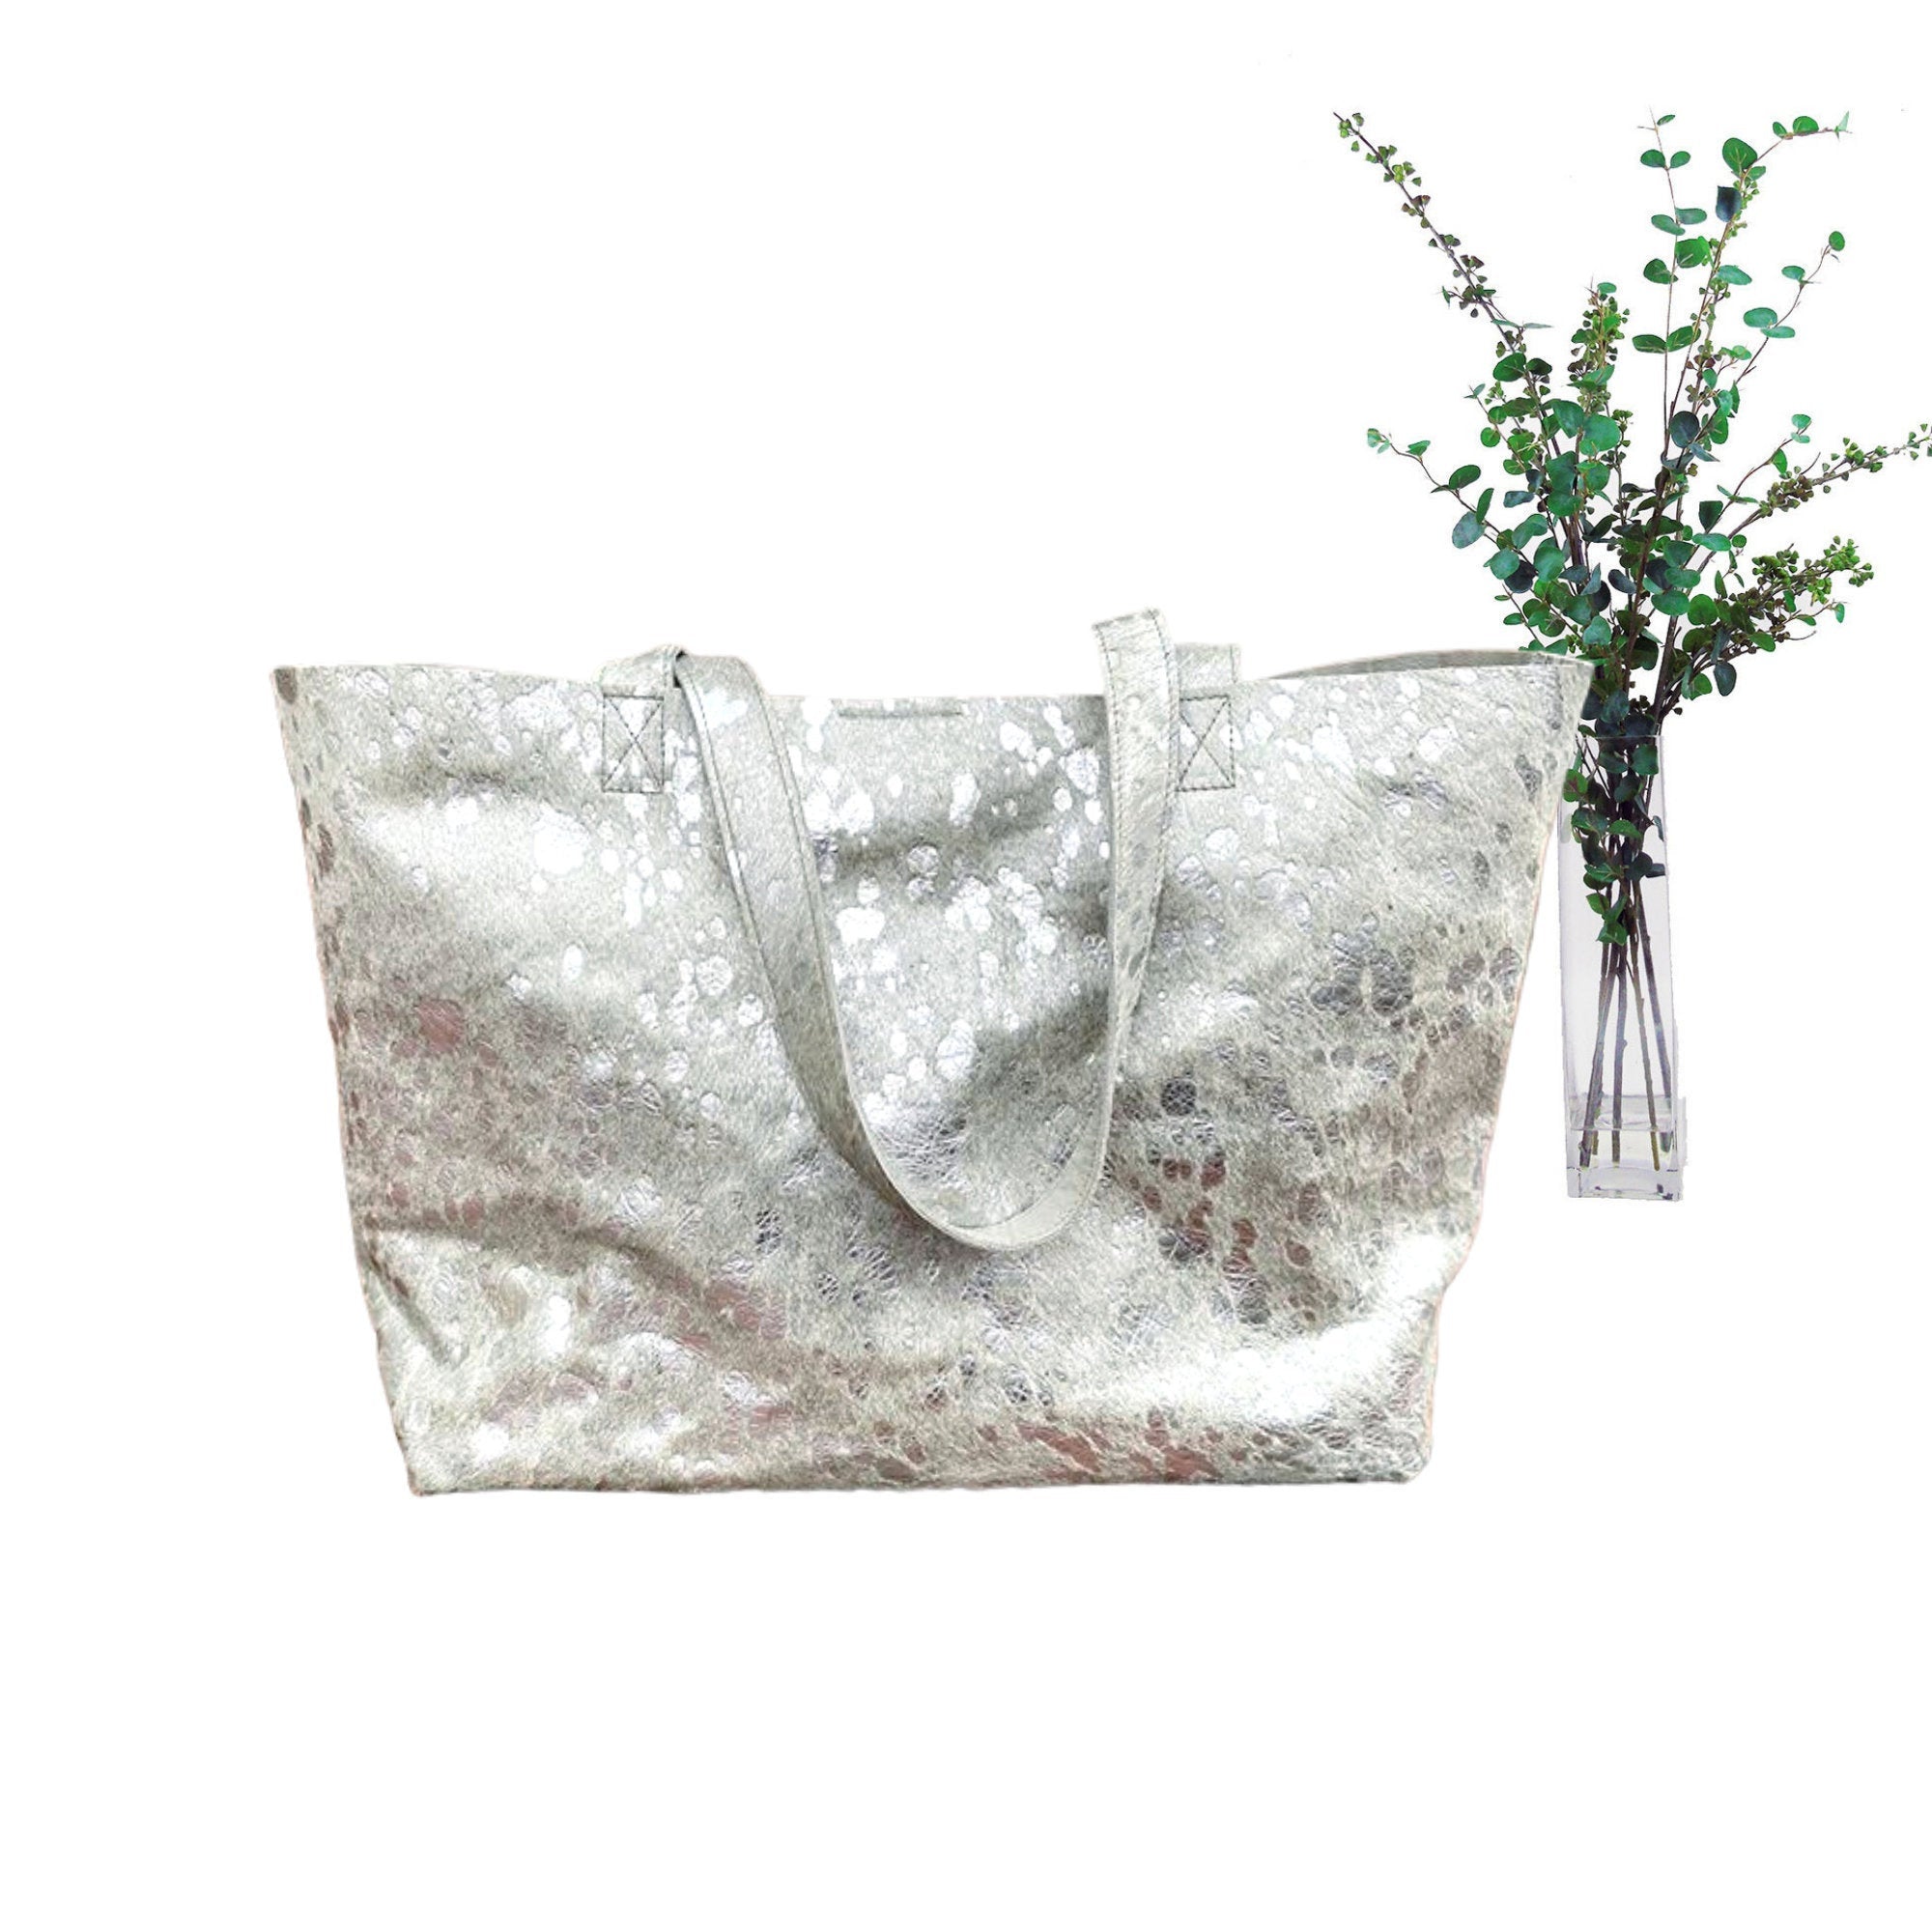 Extra large silver metallic cowhide leather bag 23”x 13”, Oversized work and travel computer bag